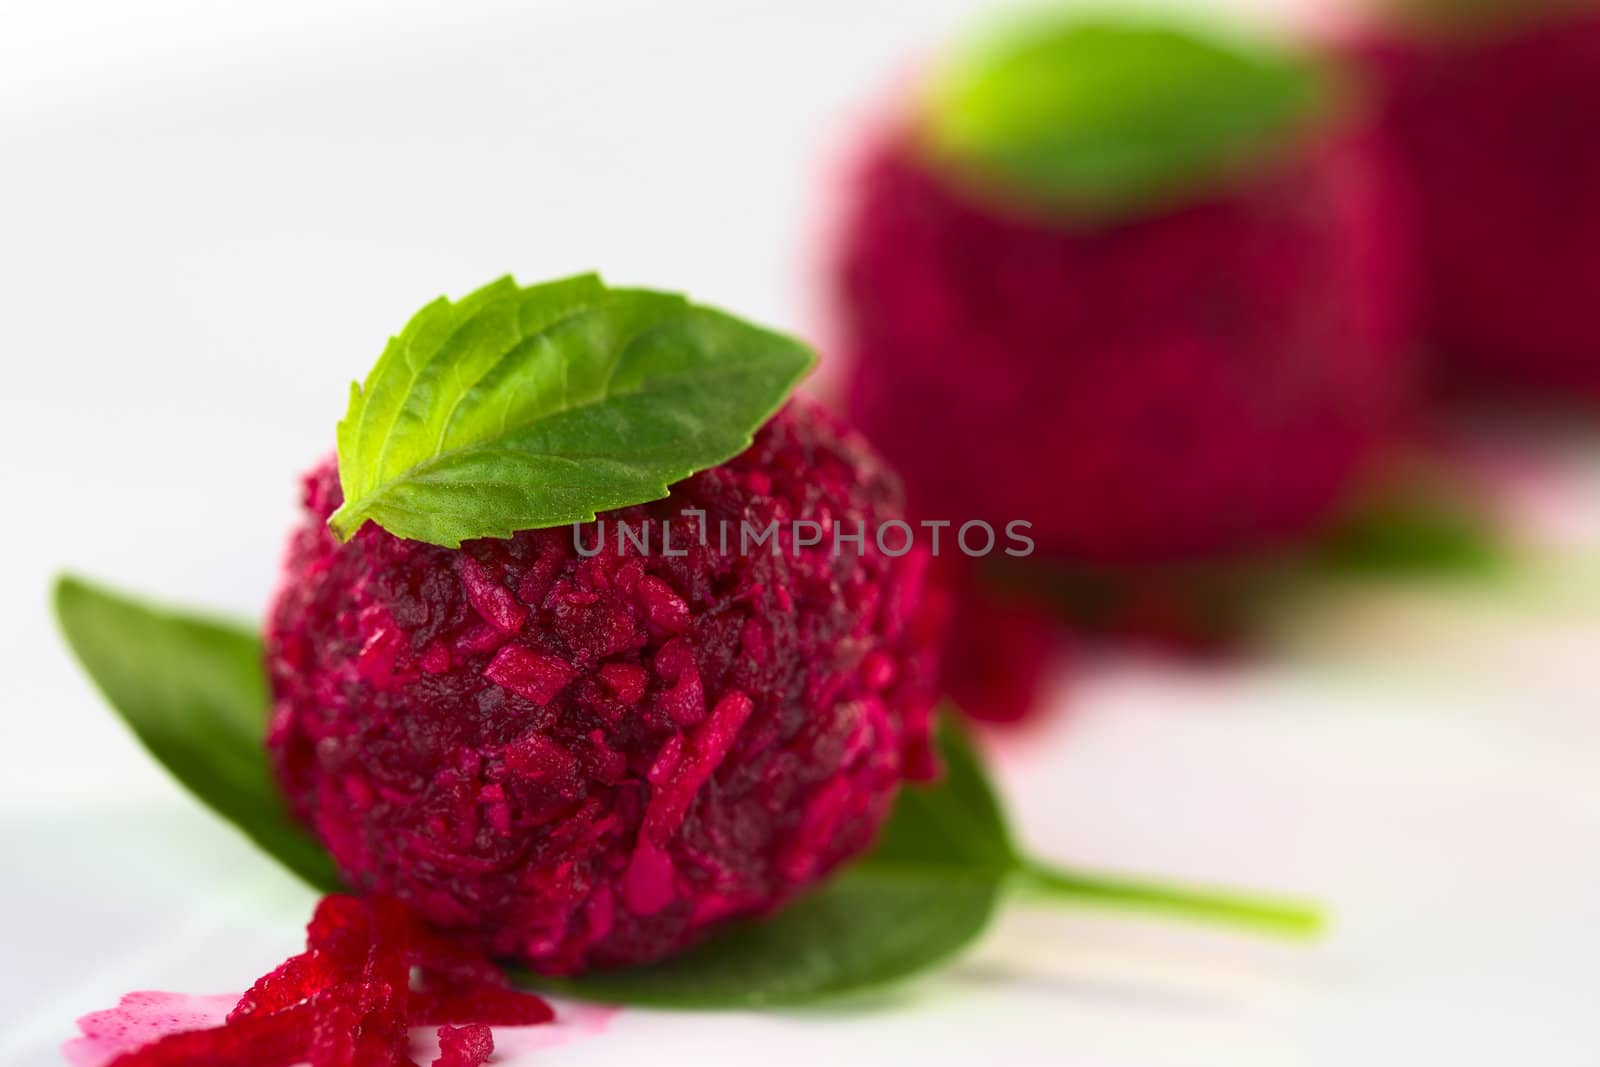 Beetroot coconut balls garnished with basil leaves (Selective Focus, Focus on the front of the first ball and the front of the basil leaf on top)